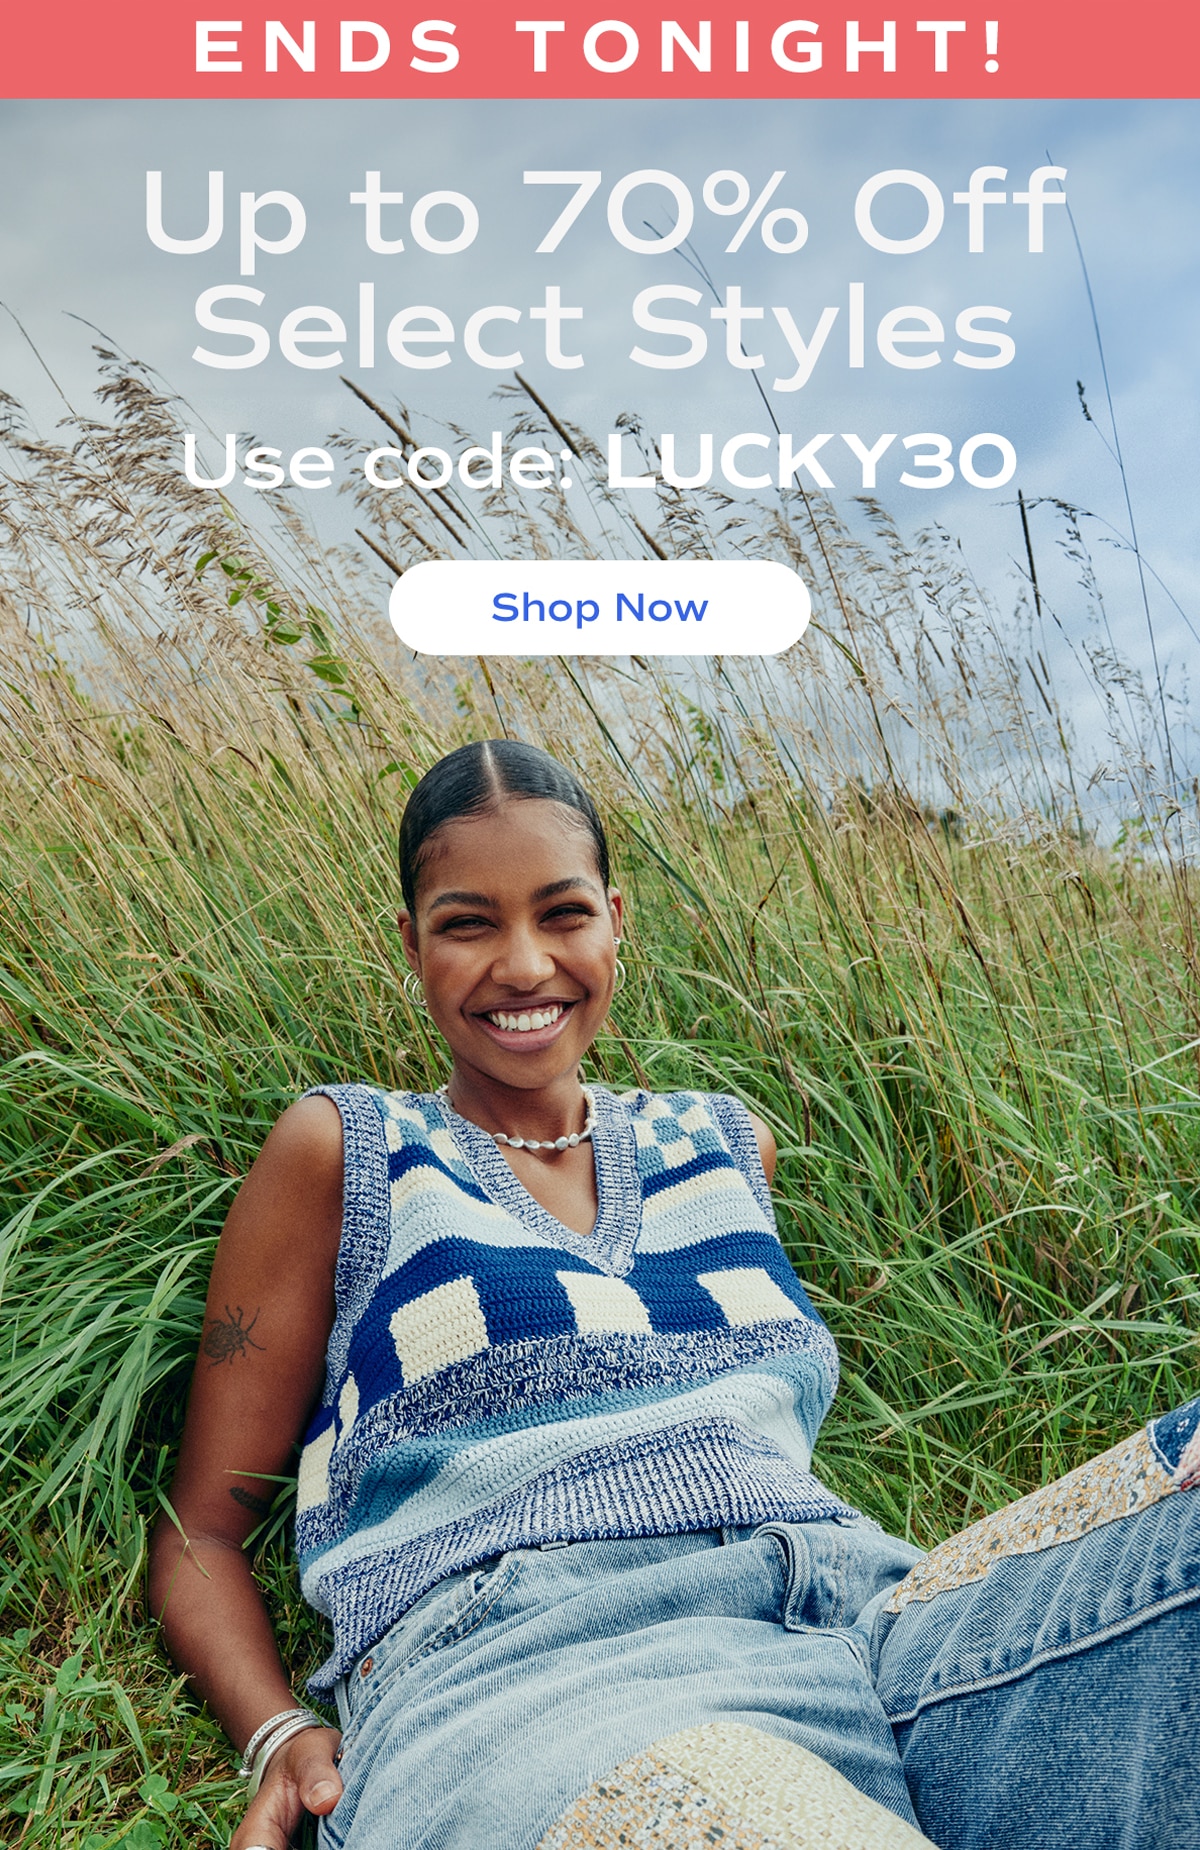 ENDS TONIGHT! | Up to 70% Off Select Styles Use code: LUCKY30 | Shop Now